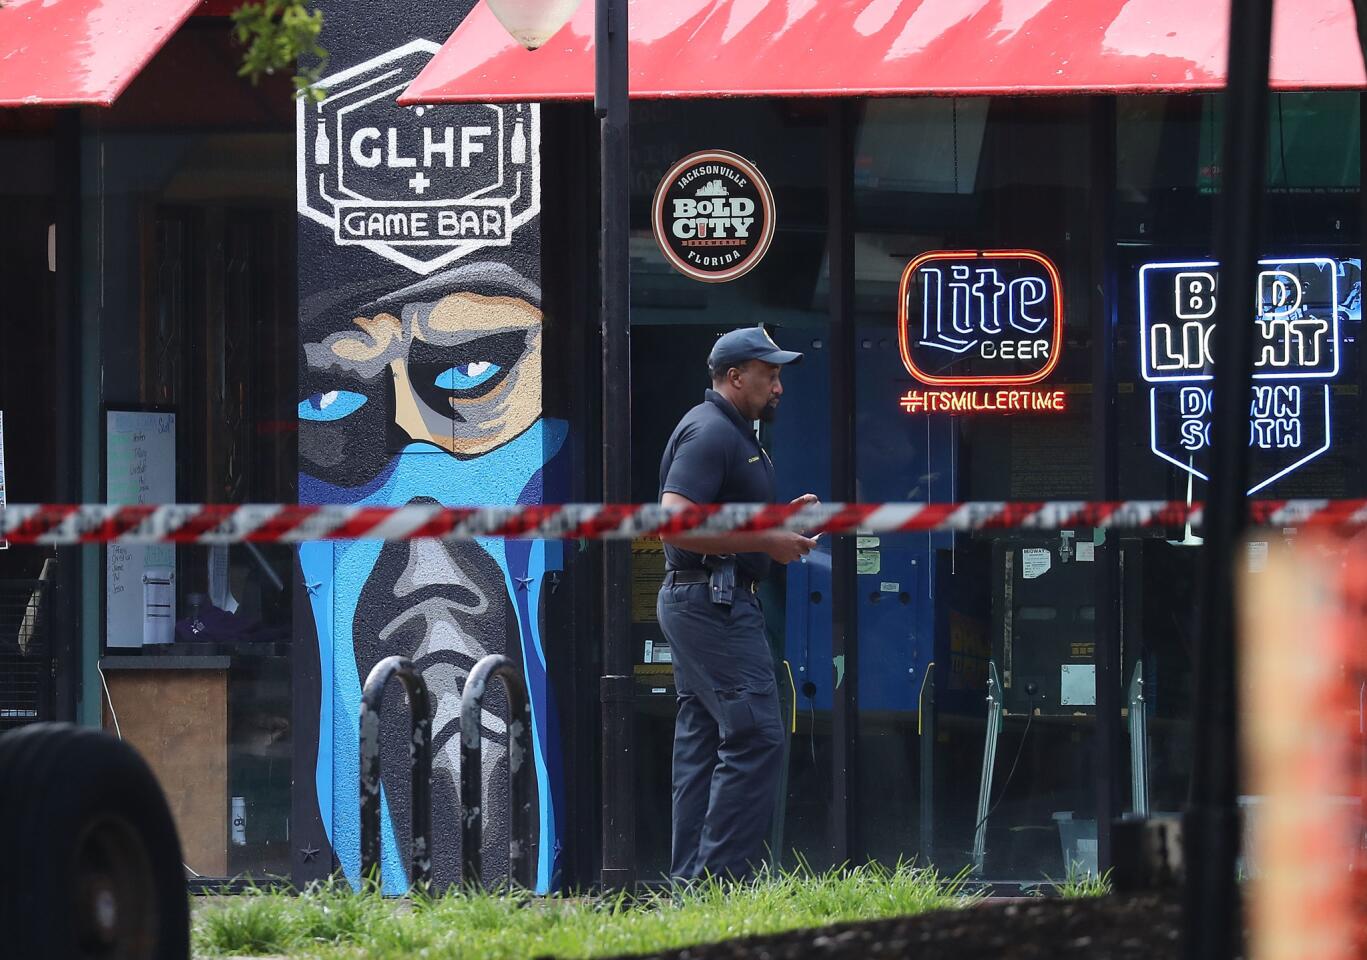 A Jacksonville Sheriff officer walks past the GLHF Game Bar where 3 people including the gunman were killed at the Jacksonville Landing on August 27, 2018 in Jacksonville, Florida.